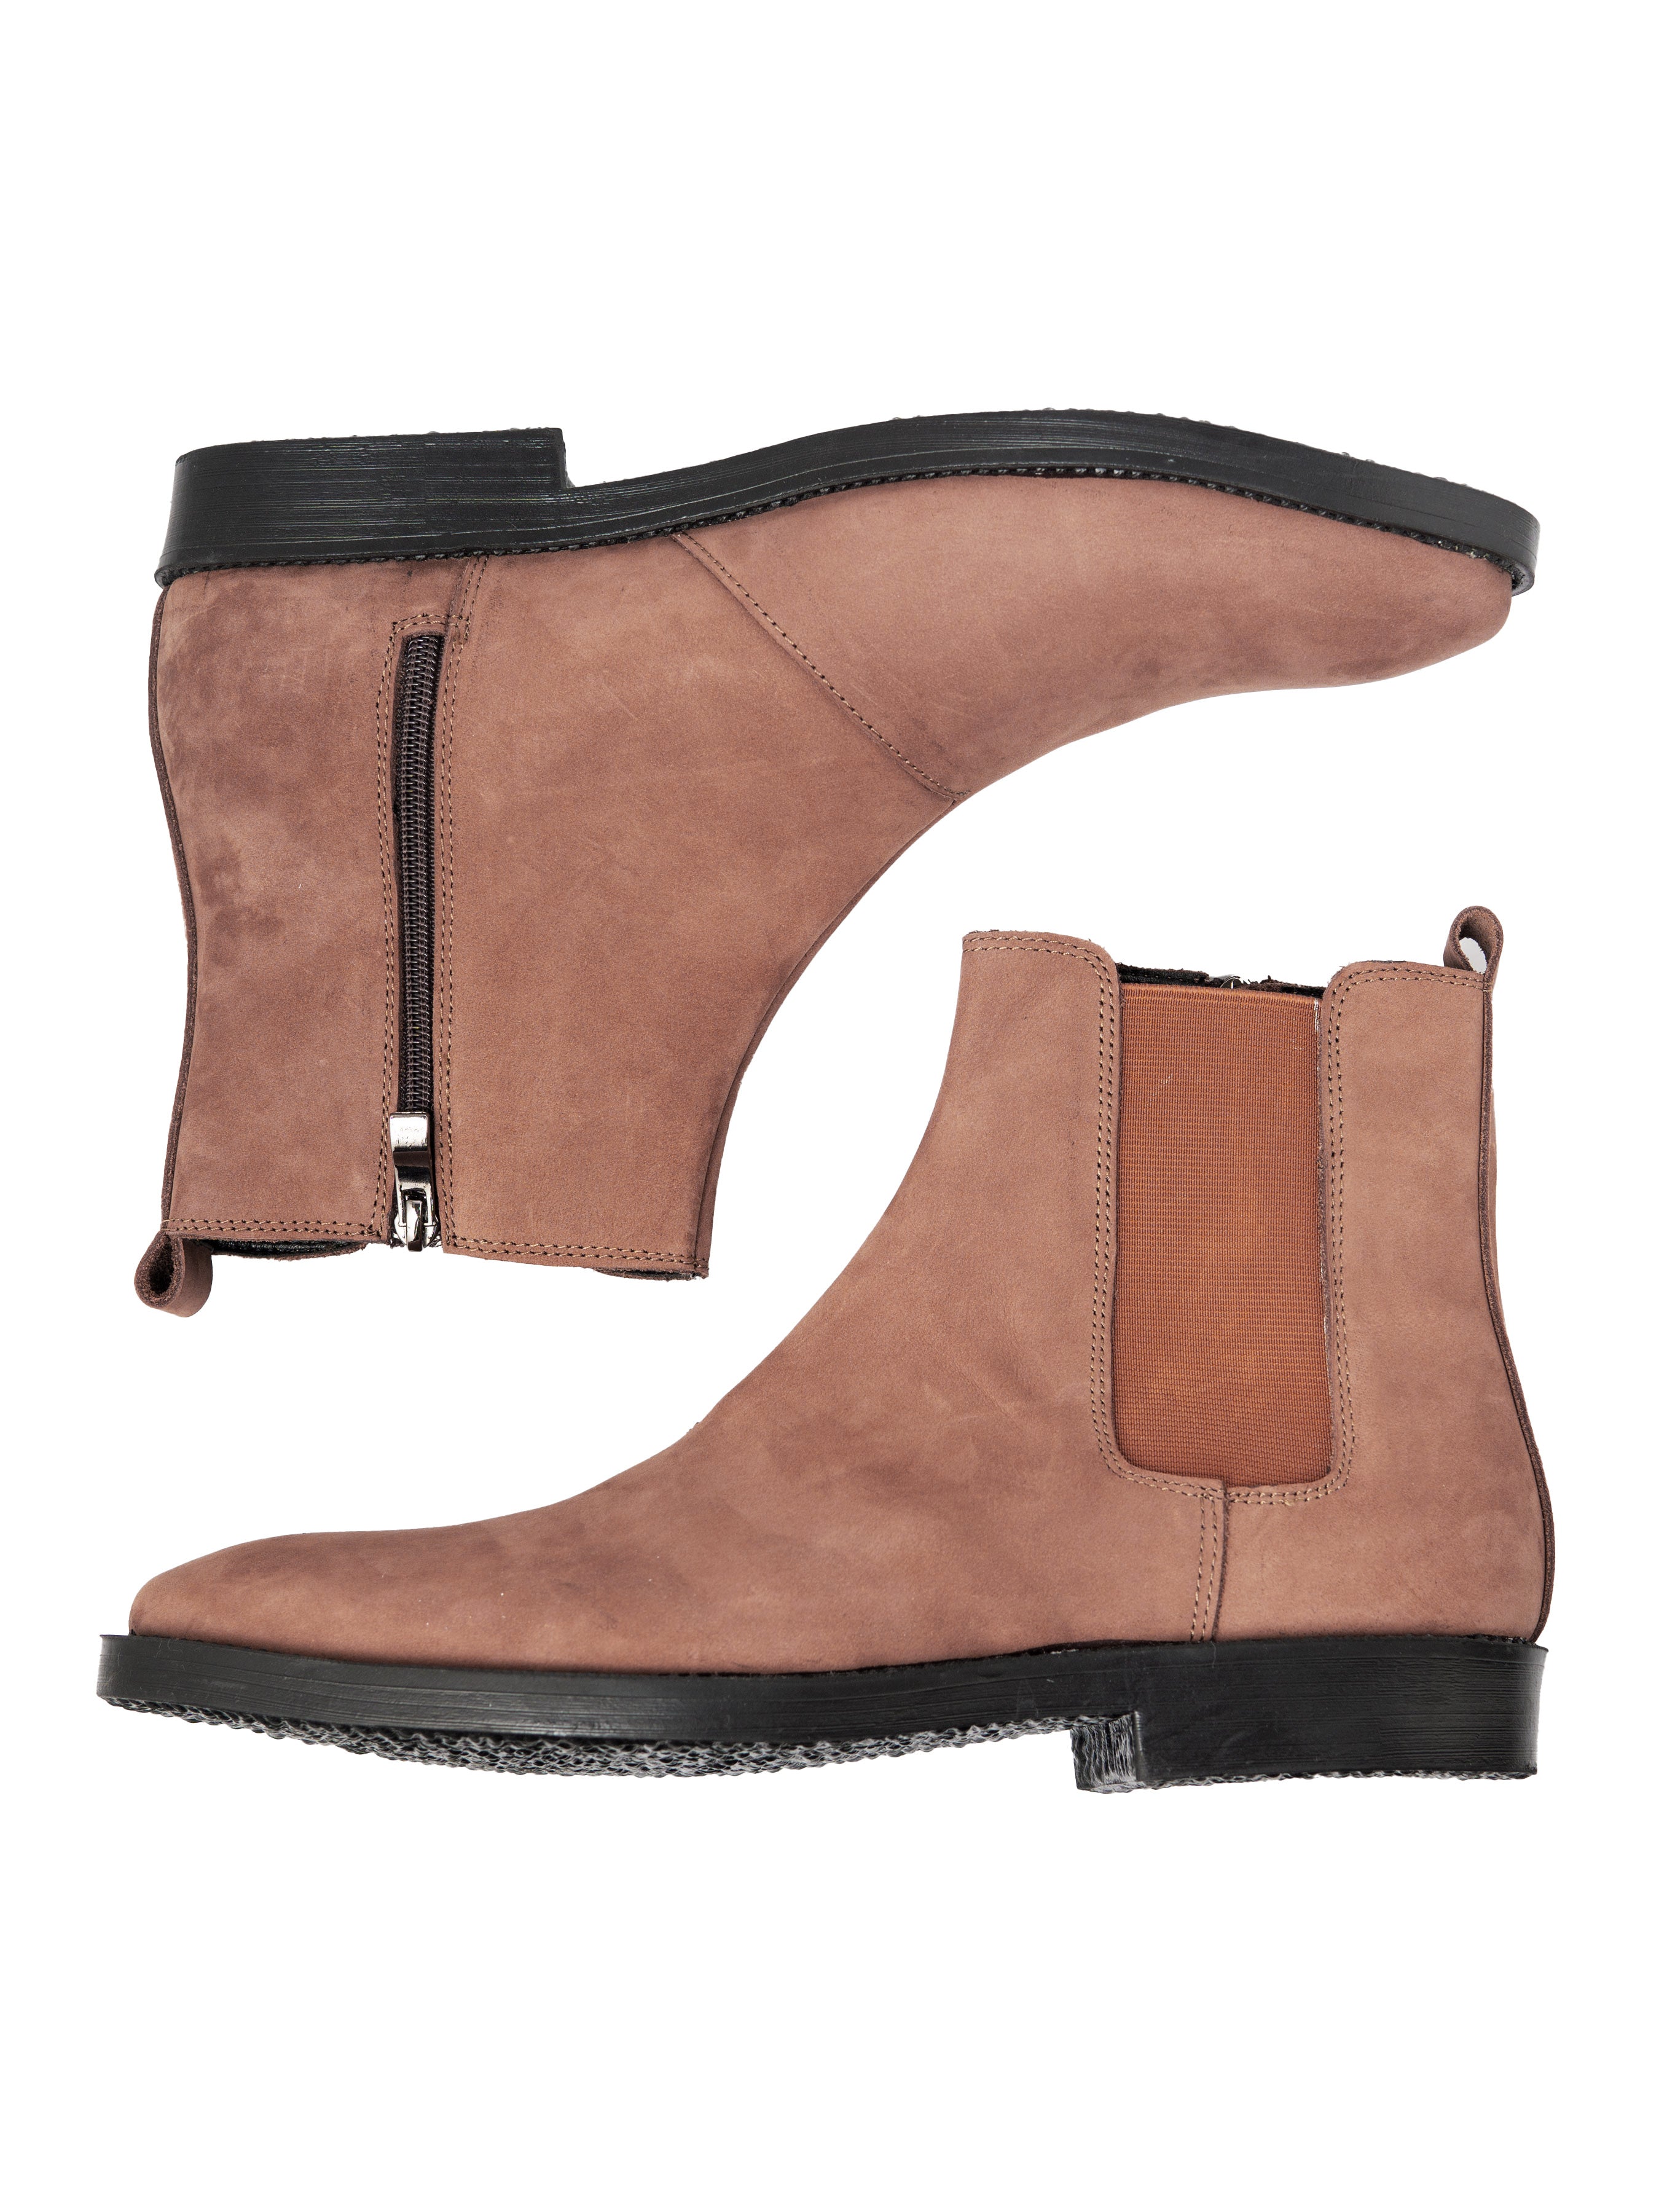 Chelsea Boots With Zipper - Cinnamon Brown Nubuck Leather (Crepe Sole)